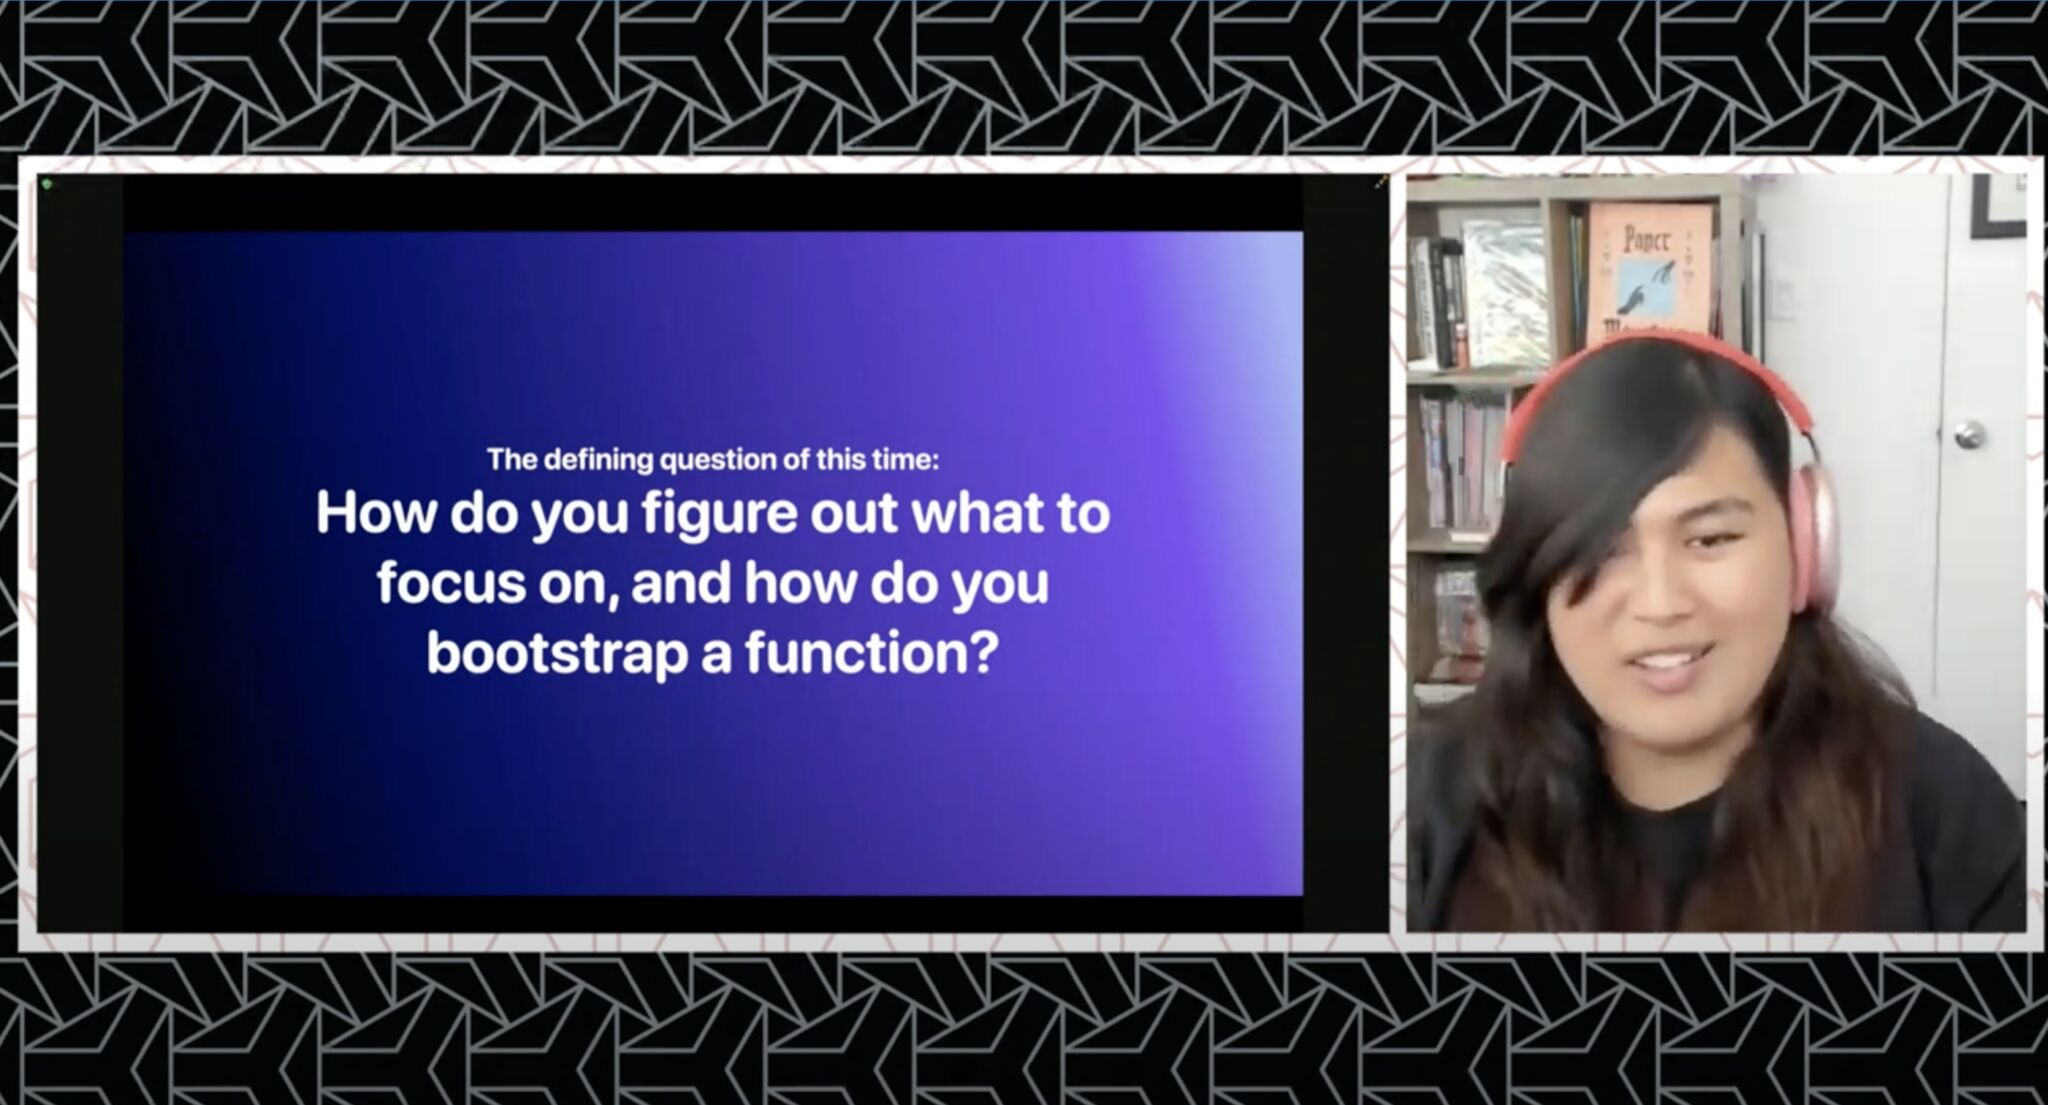 Katheryn Gonzalez - How do you figure out what to focus on, and how do you bootstrap a function?